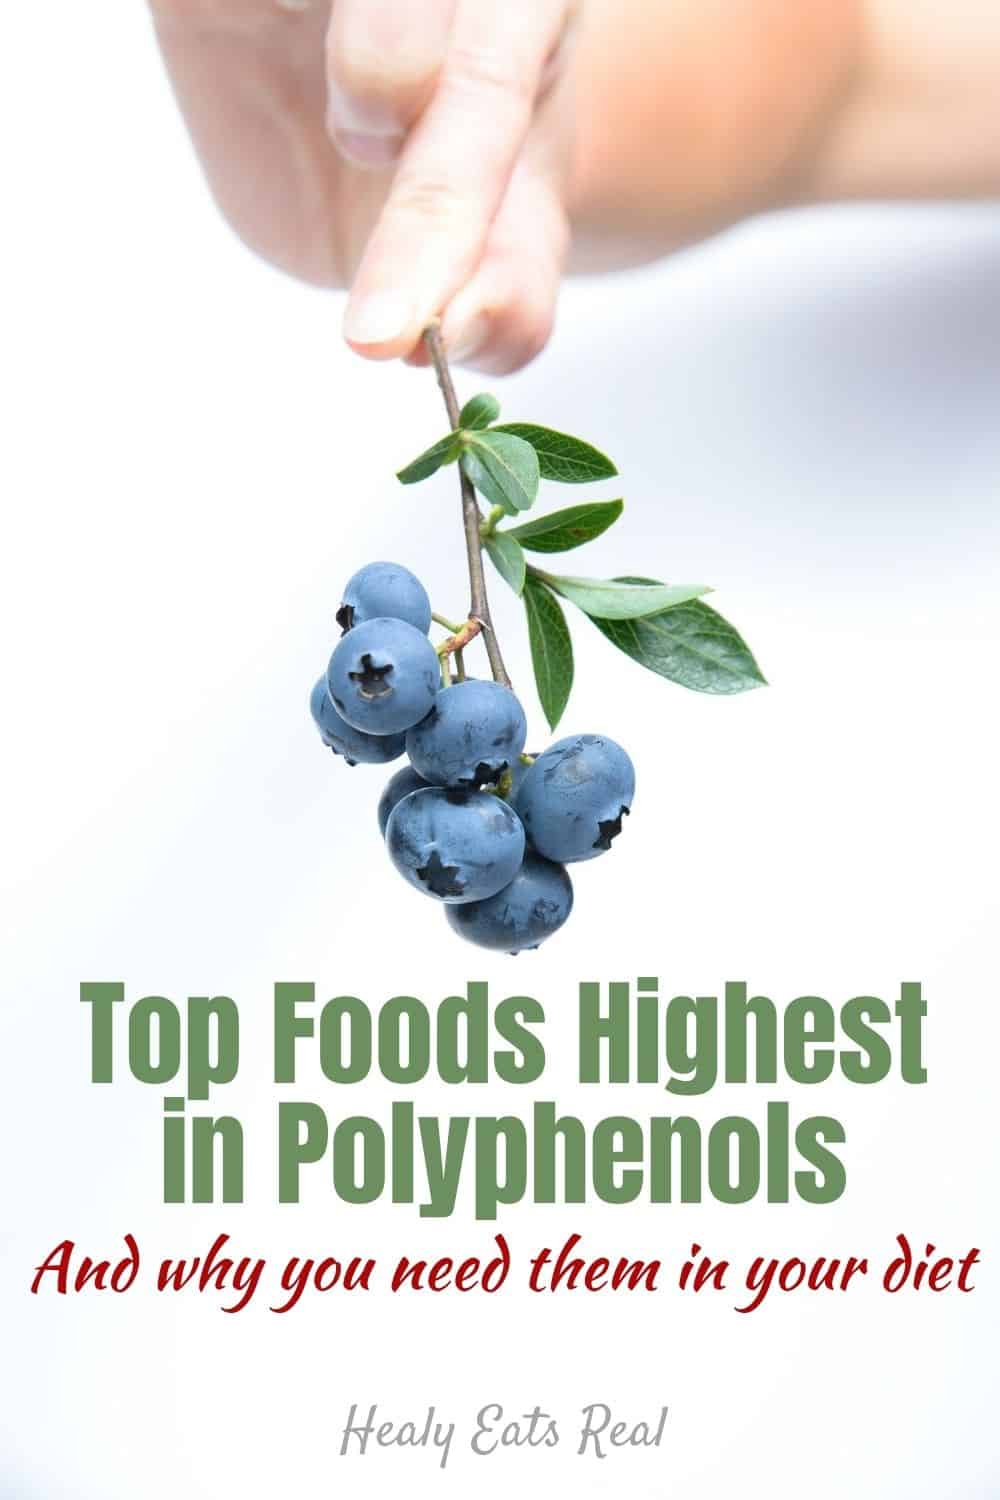 Top Foods Highest in Polyphenols (And why you need them in your diet)